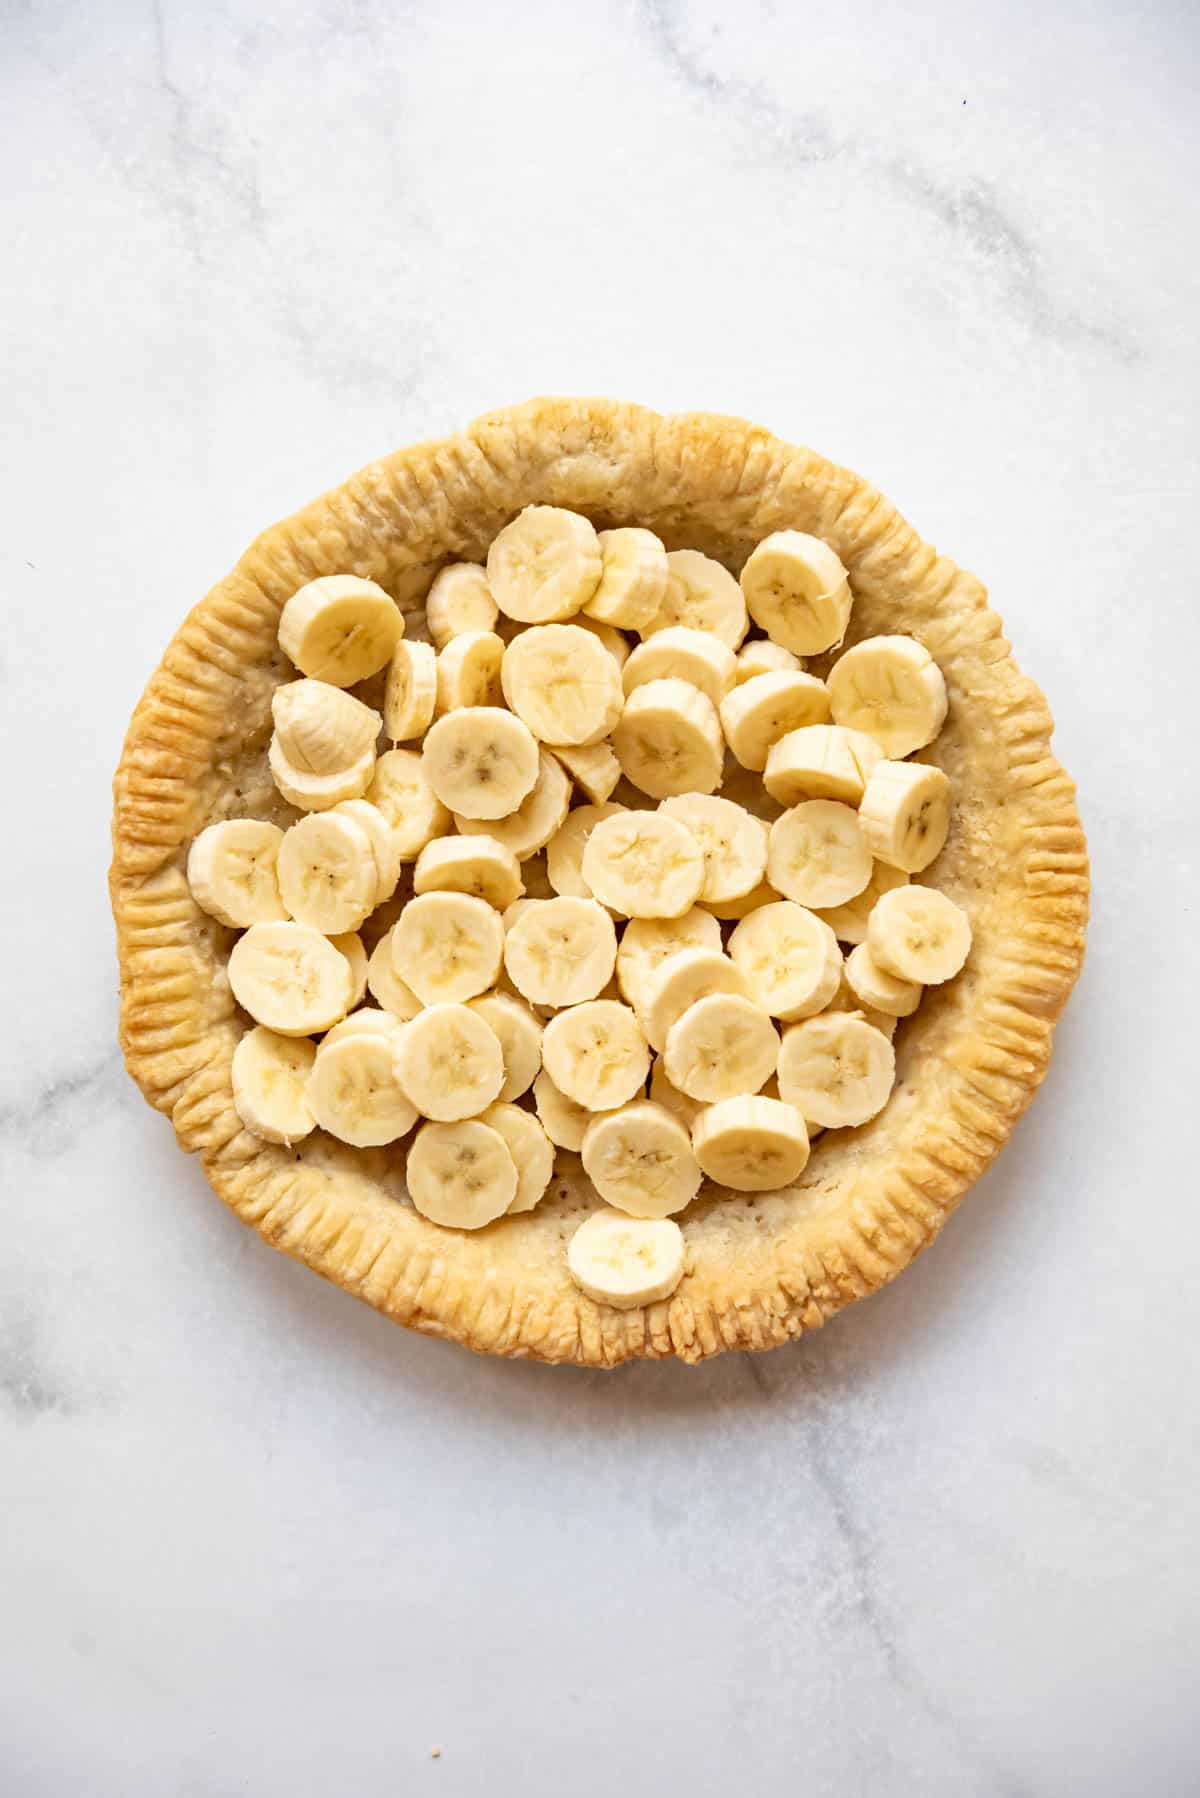 A layer of sliced fresh bananas in a homemade pie crust that has been blind-baked.